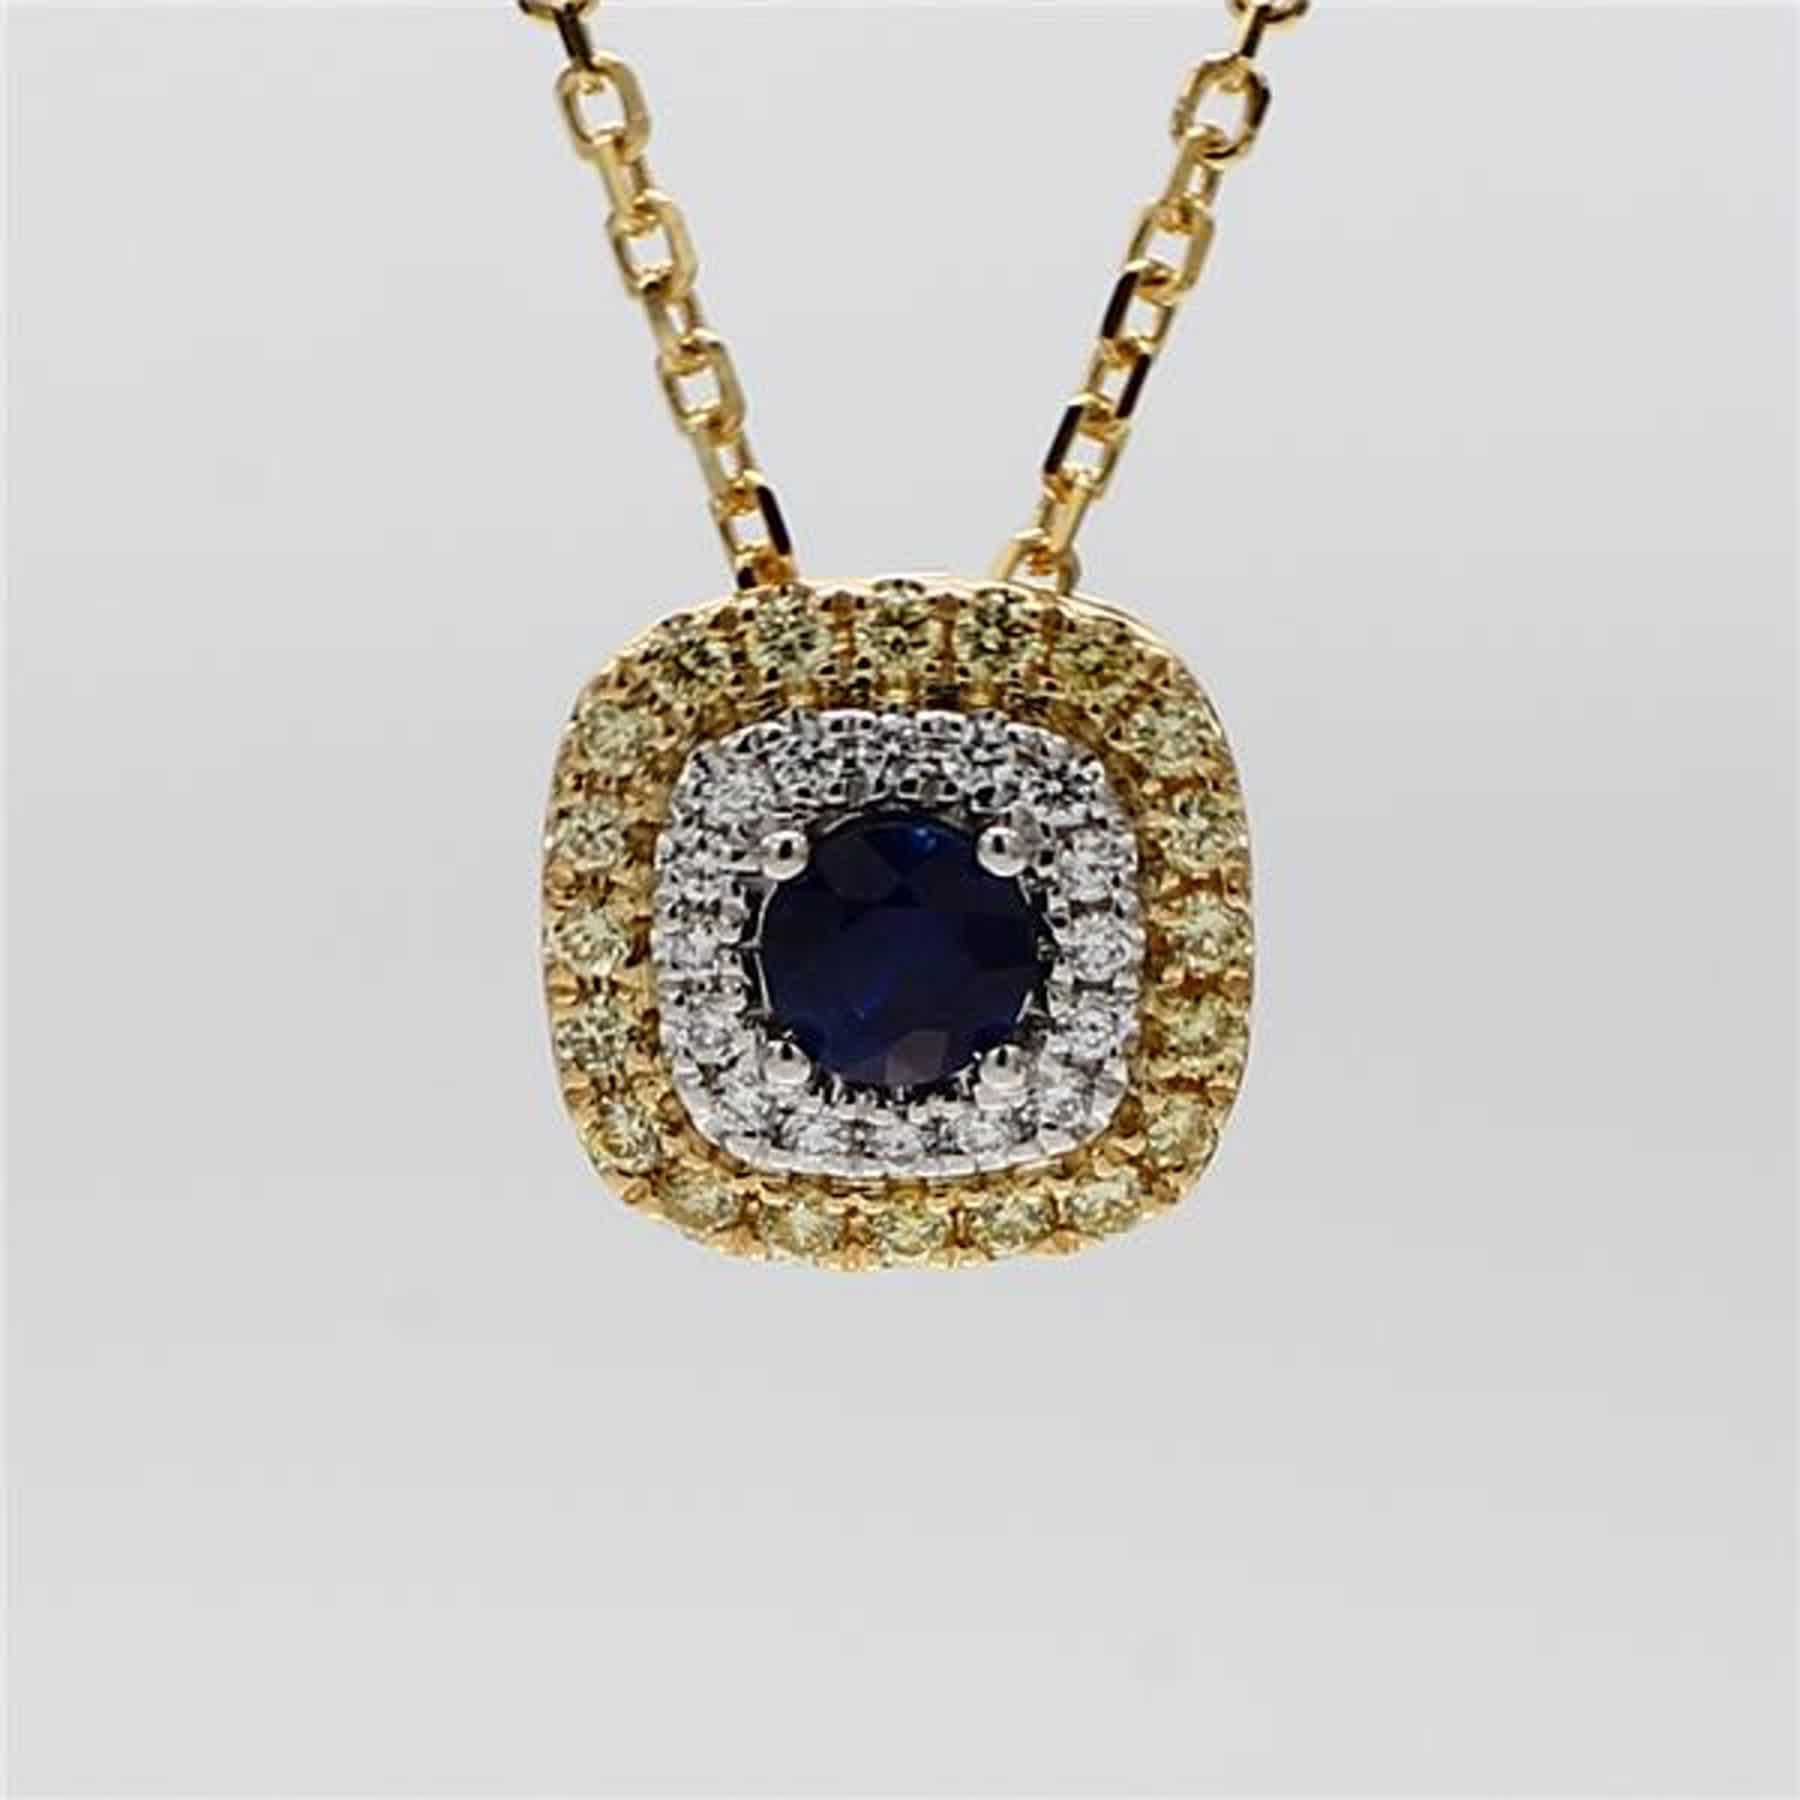 RareGemWorld's classic sapphire pendant. Mounted in a beautiful 18K Yellow and White Gold setting with a natural round cut blue sapphire. The sapphire is surrounded by natural round yellow diamond melee and natural round white diamond melee. This